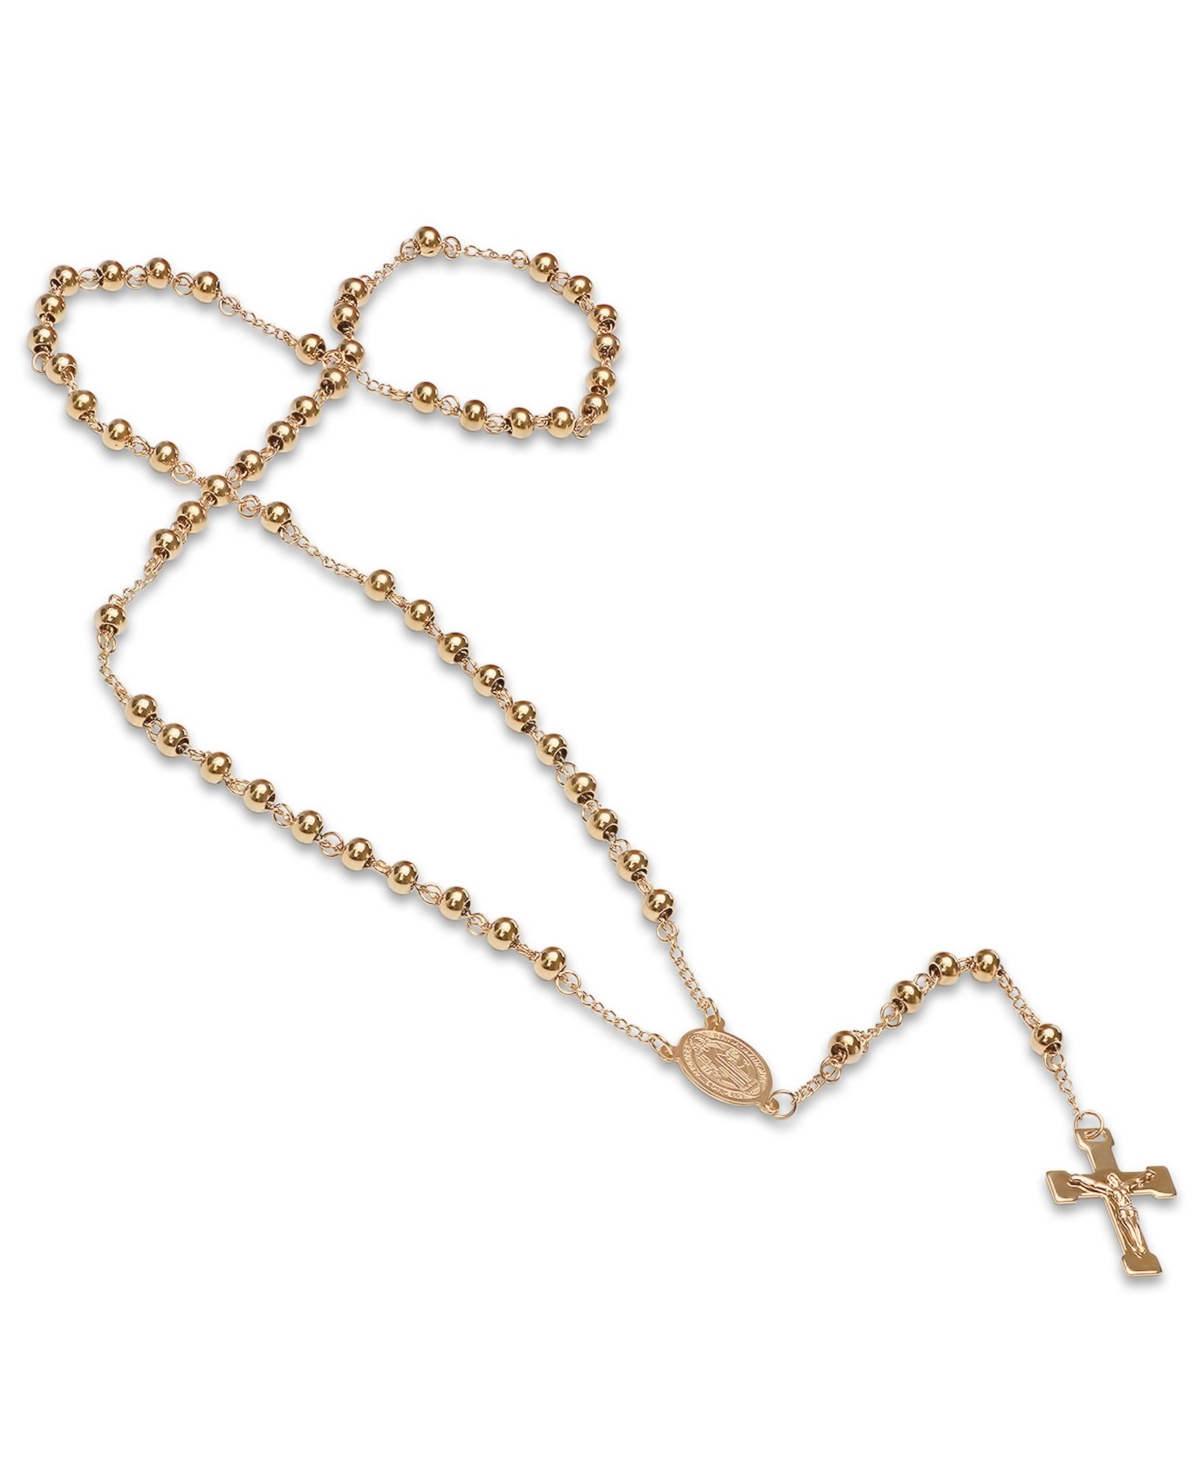 Unisex 18K Gold Plated Stainless Steel Beaded Classic Rosary Necklace - Gold Tone